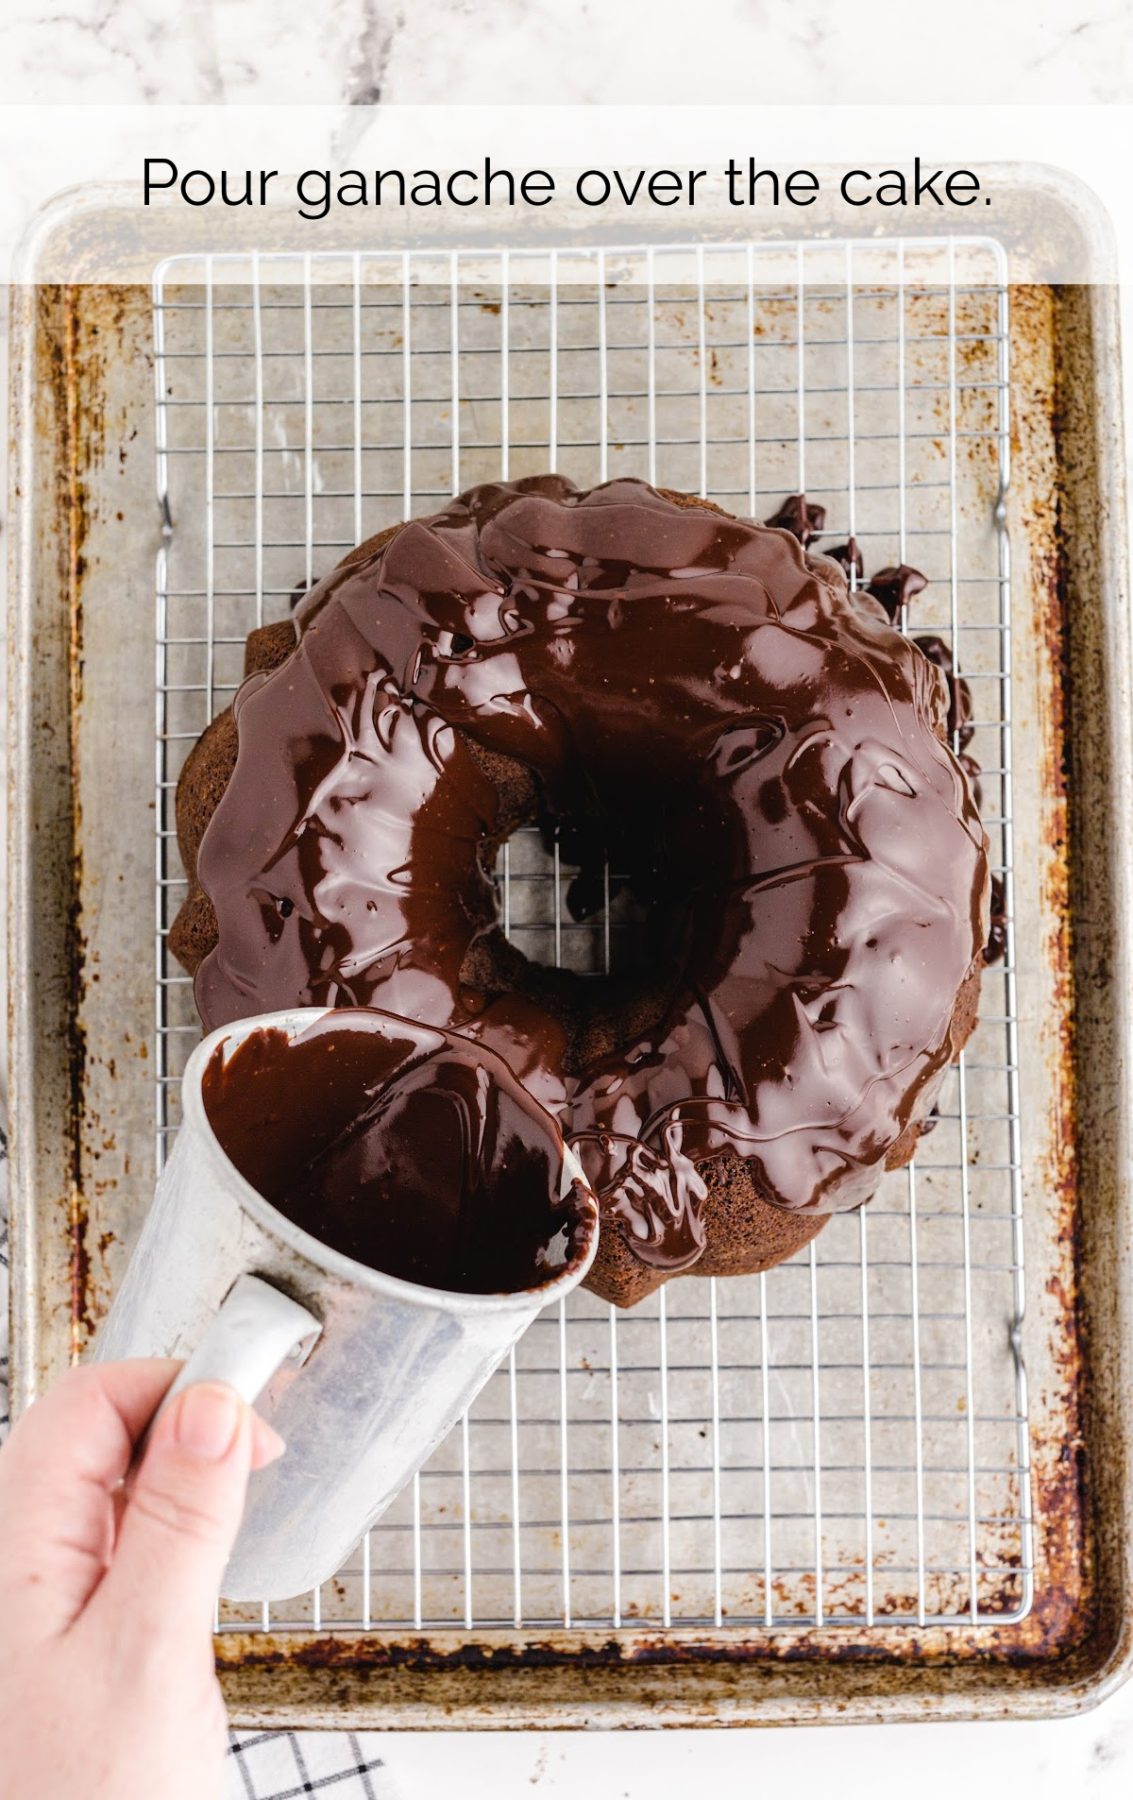 chocolate ganache poured over the cake